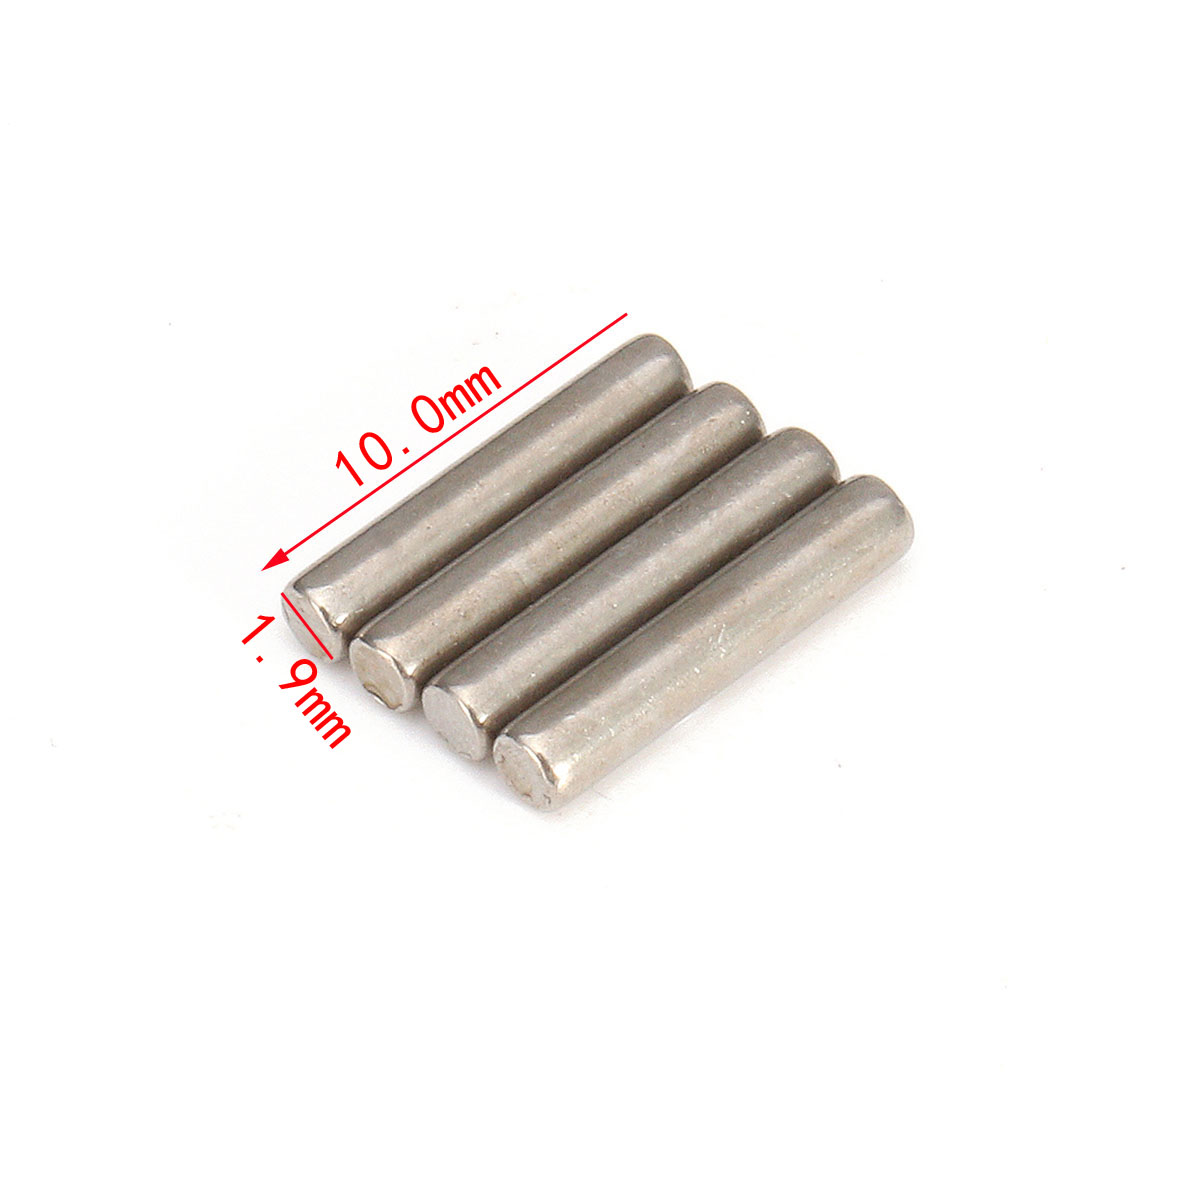 110-12mm-Extension-Hex-Adaptor-Connector-Kit-For-SCX10-WRAITH-RC-Car-Crawler-Parts-1182669